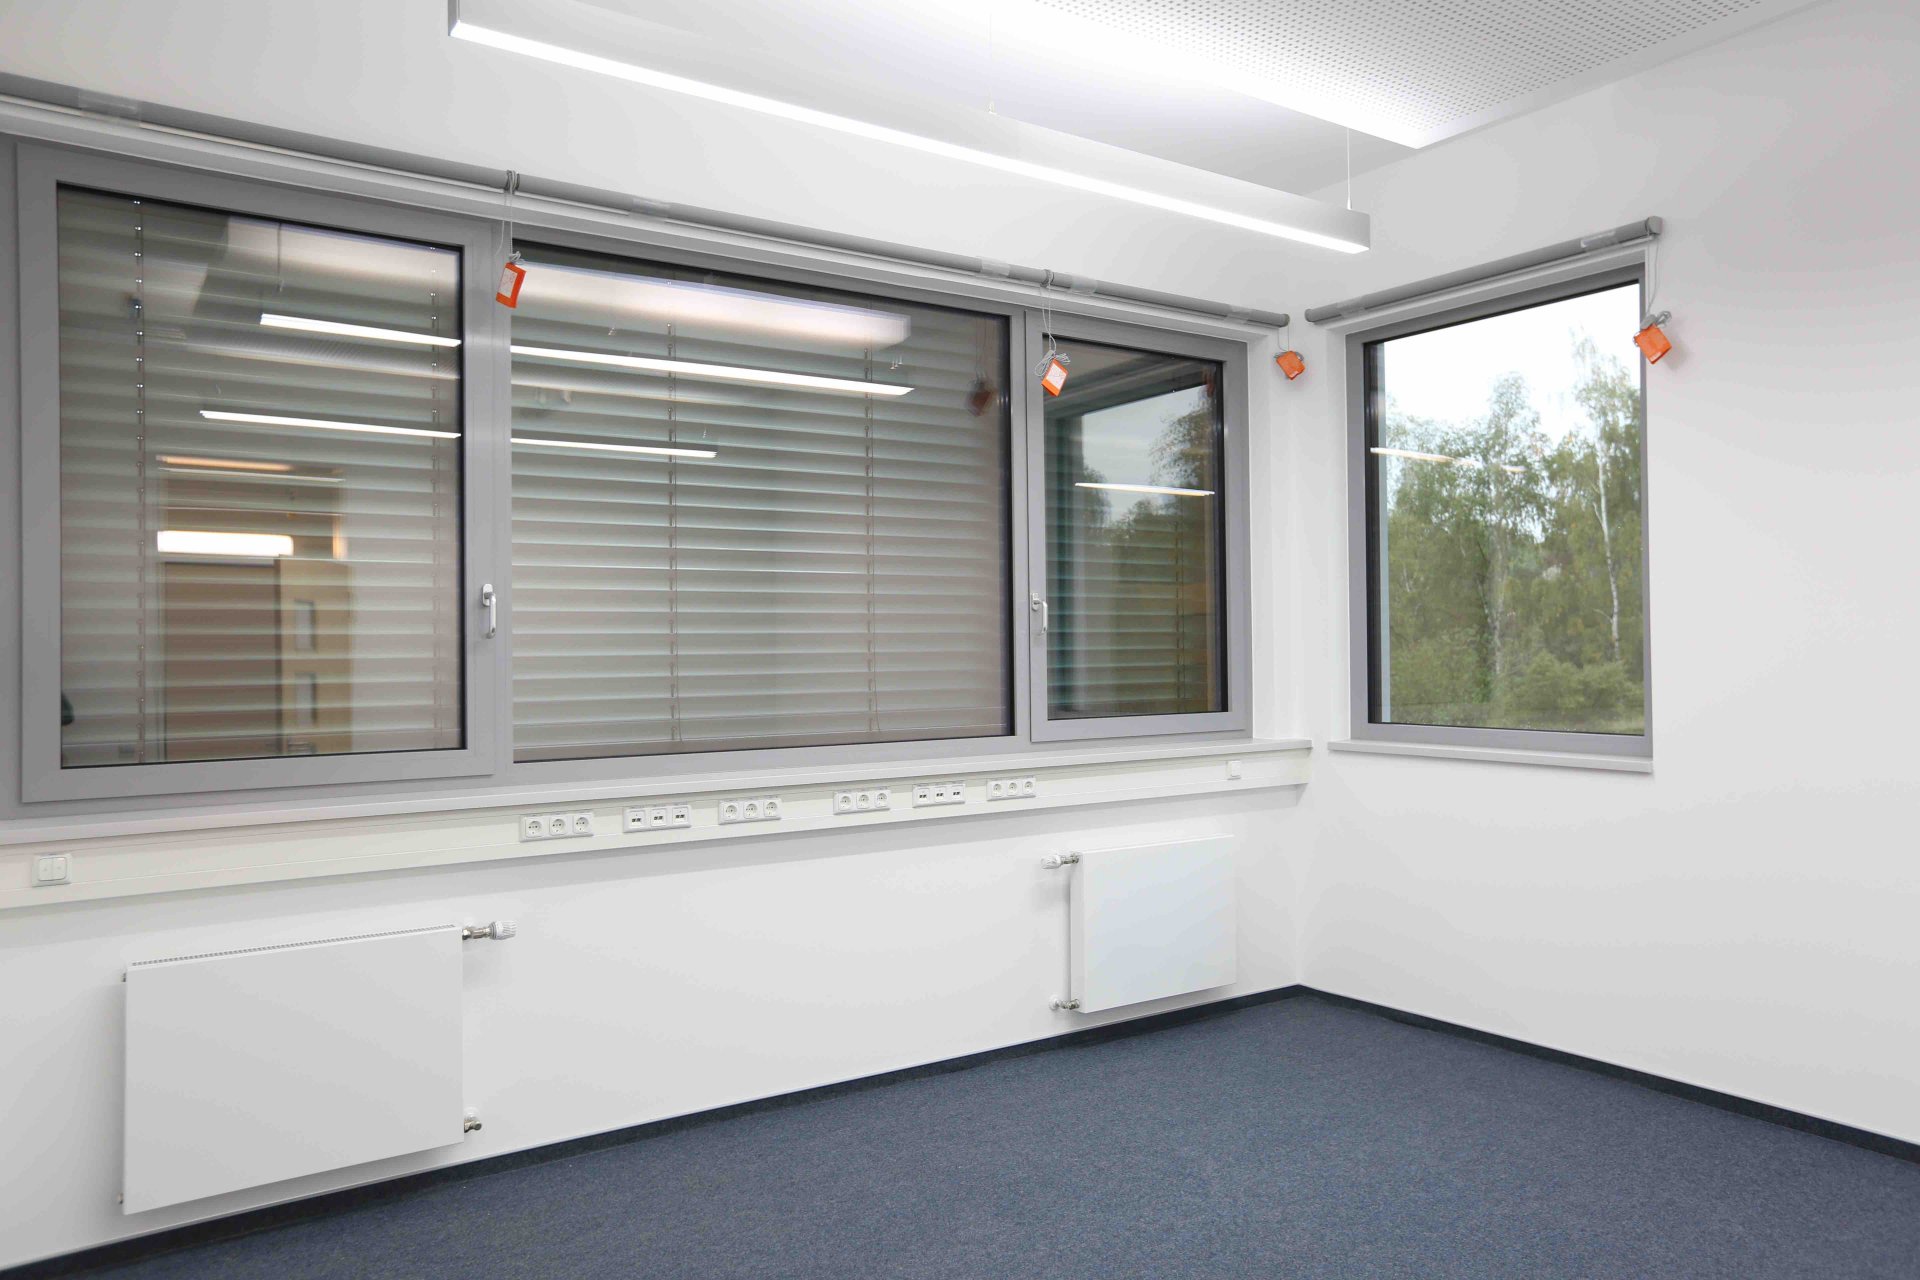 An office in the new building (© Max Planck Institut for Marine Microbiology, K. Matthes)